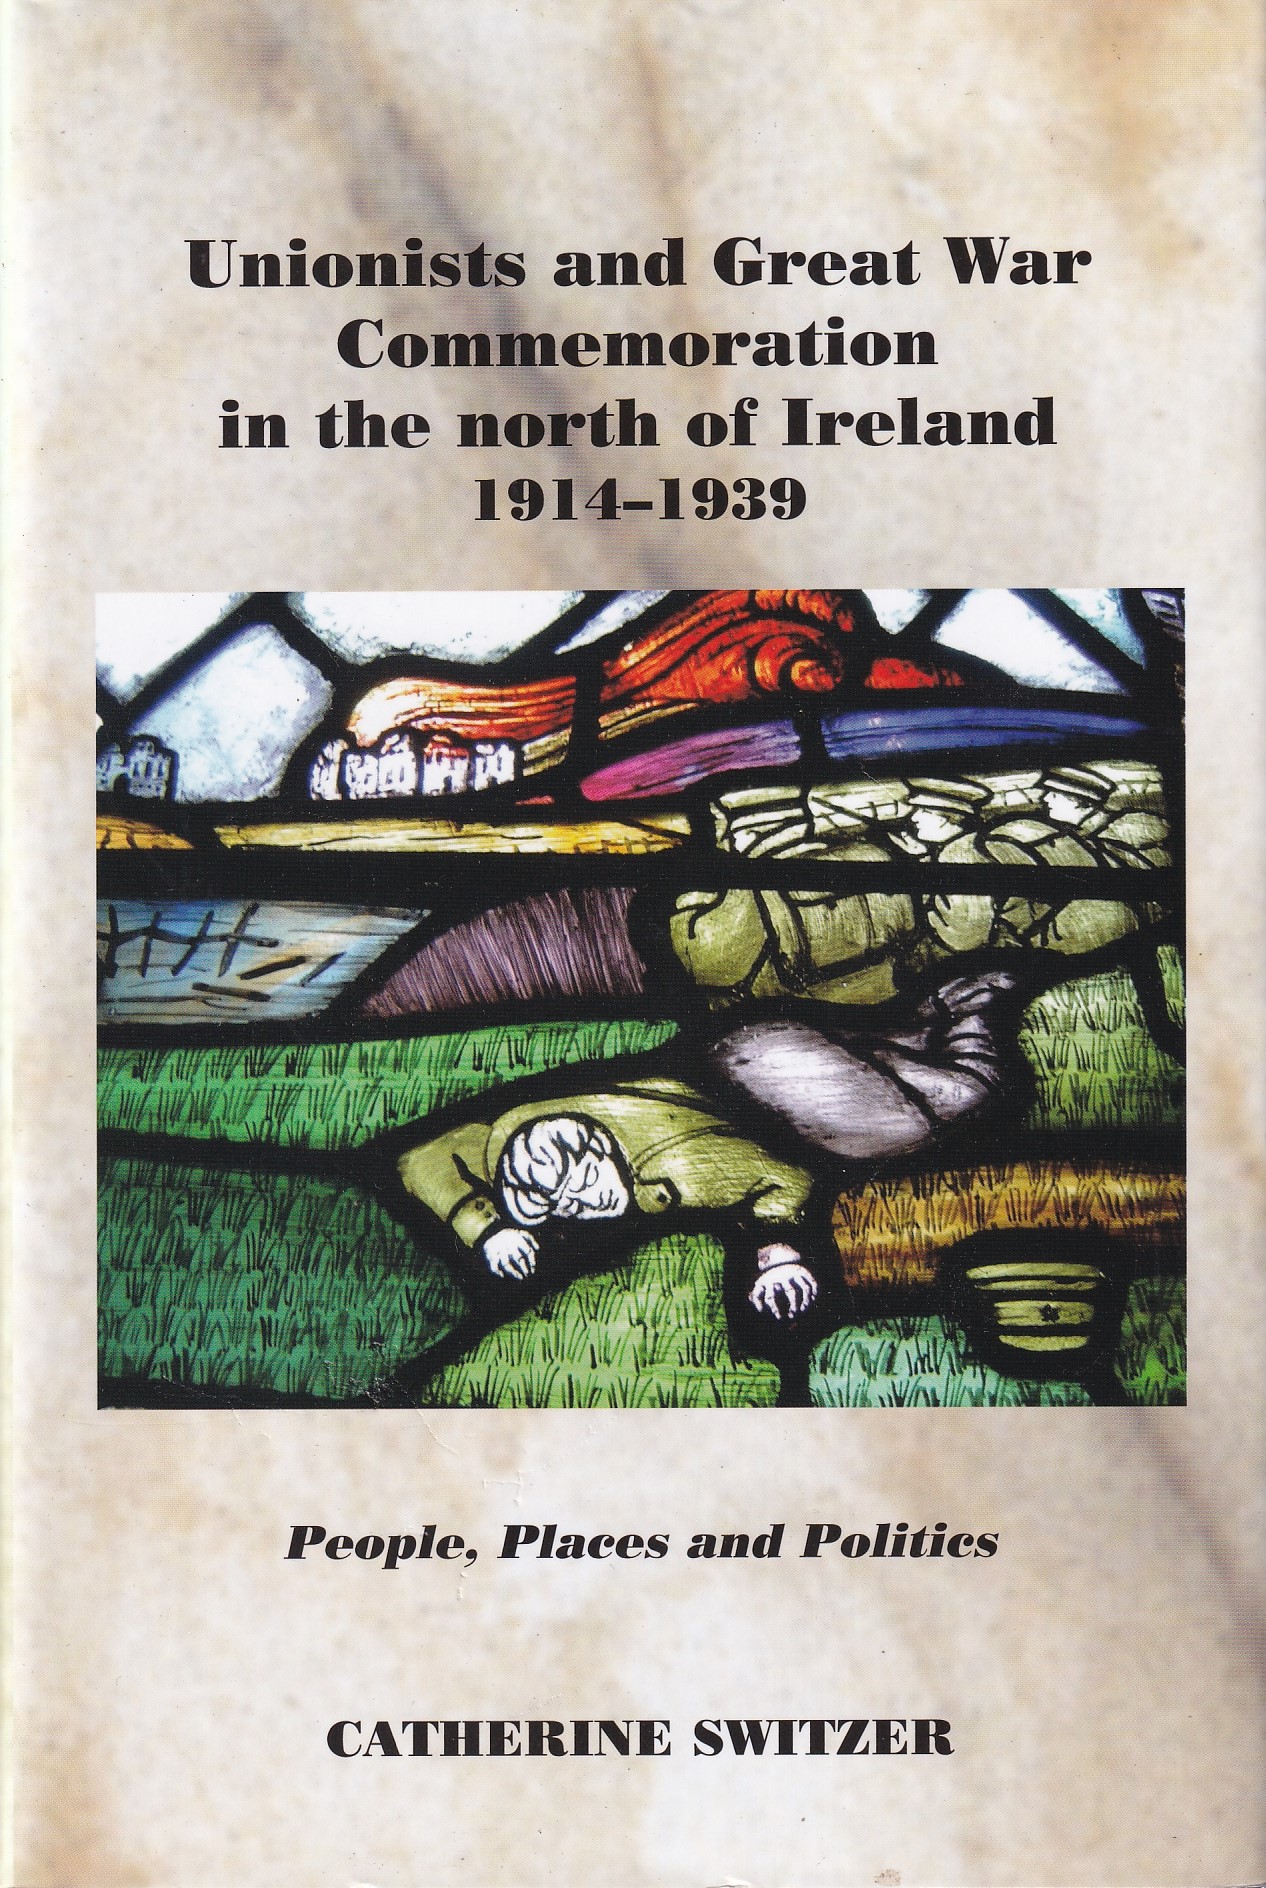 Unionists and Great War Commemoration in the North of Ireland, 1914-1939: People, Places and Politics | Catherine Switzer | Charlie Byrne's